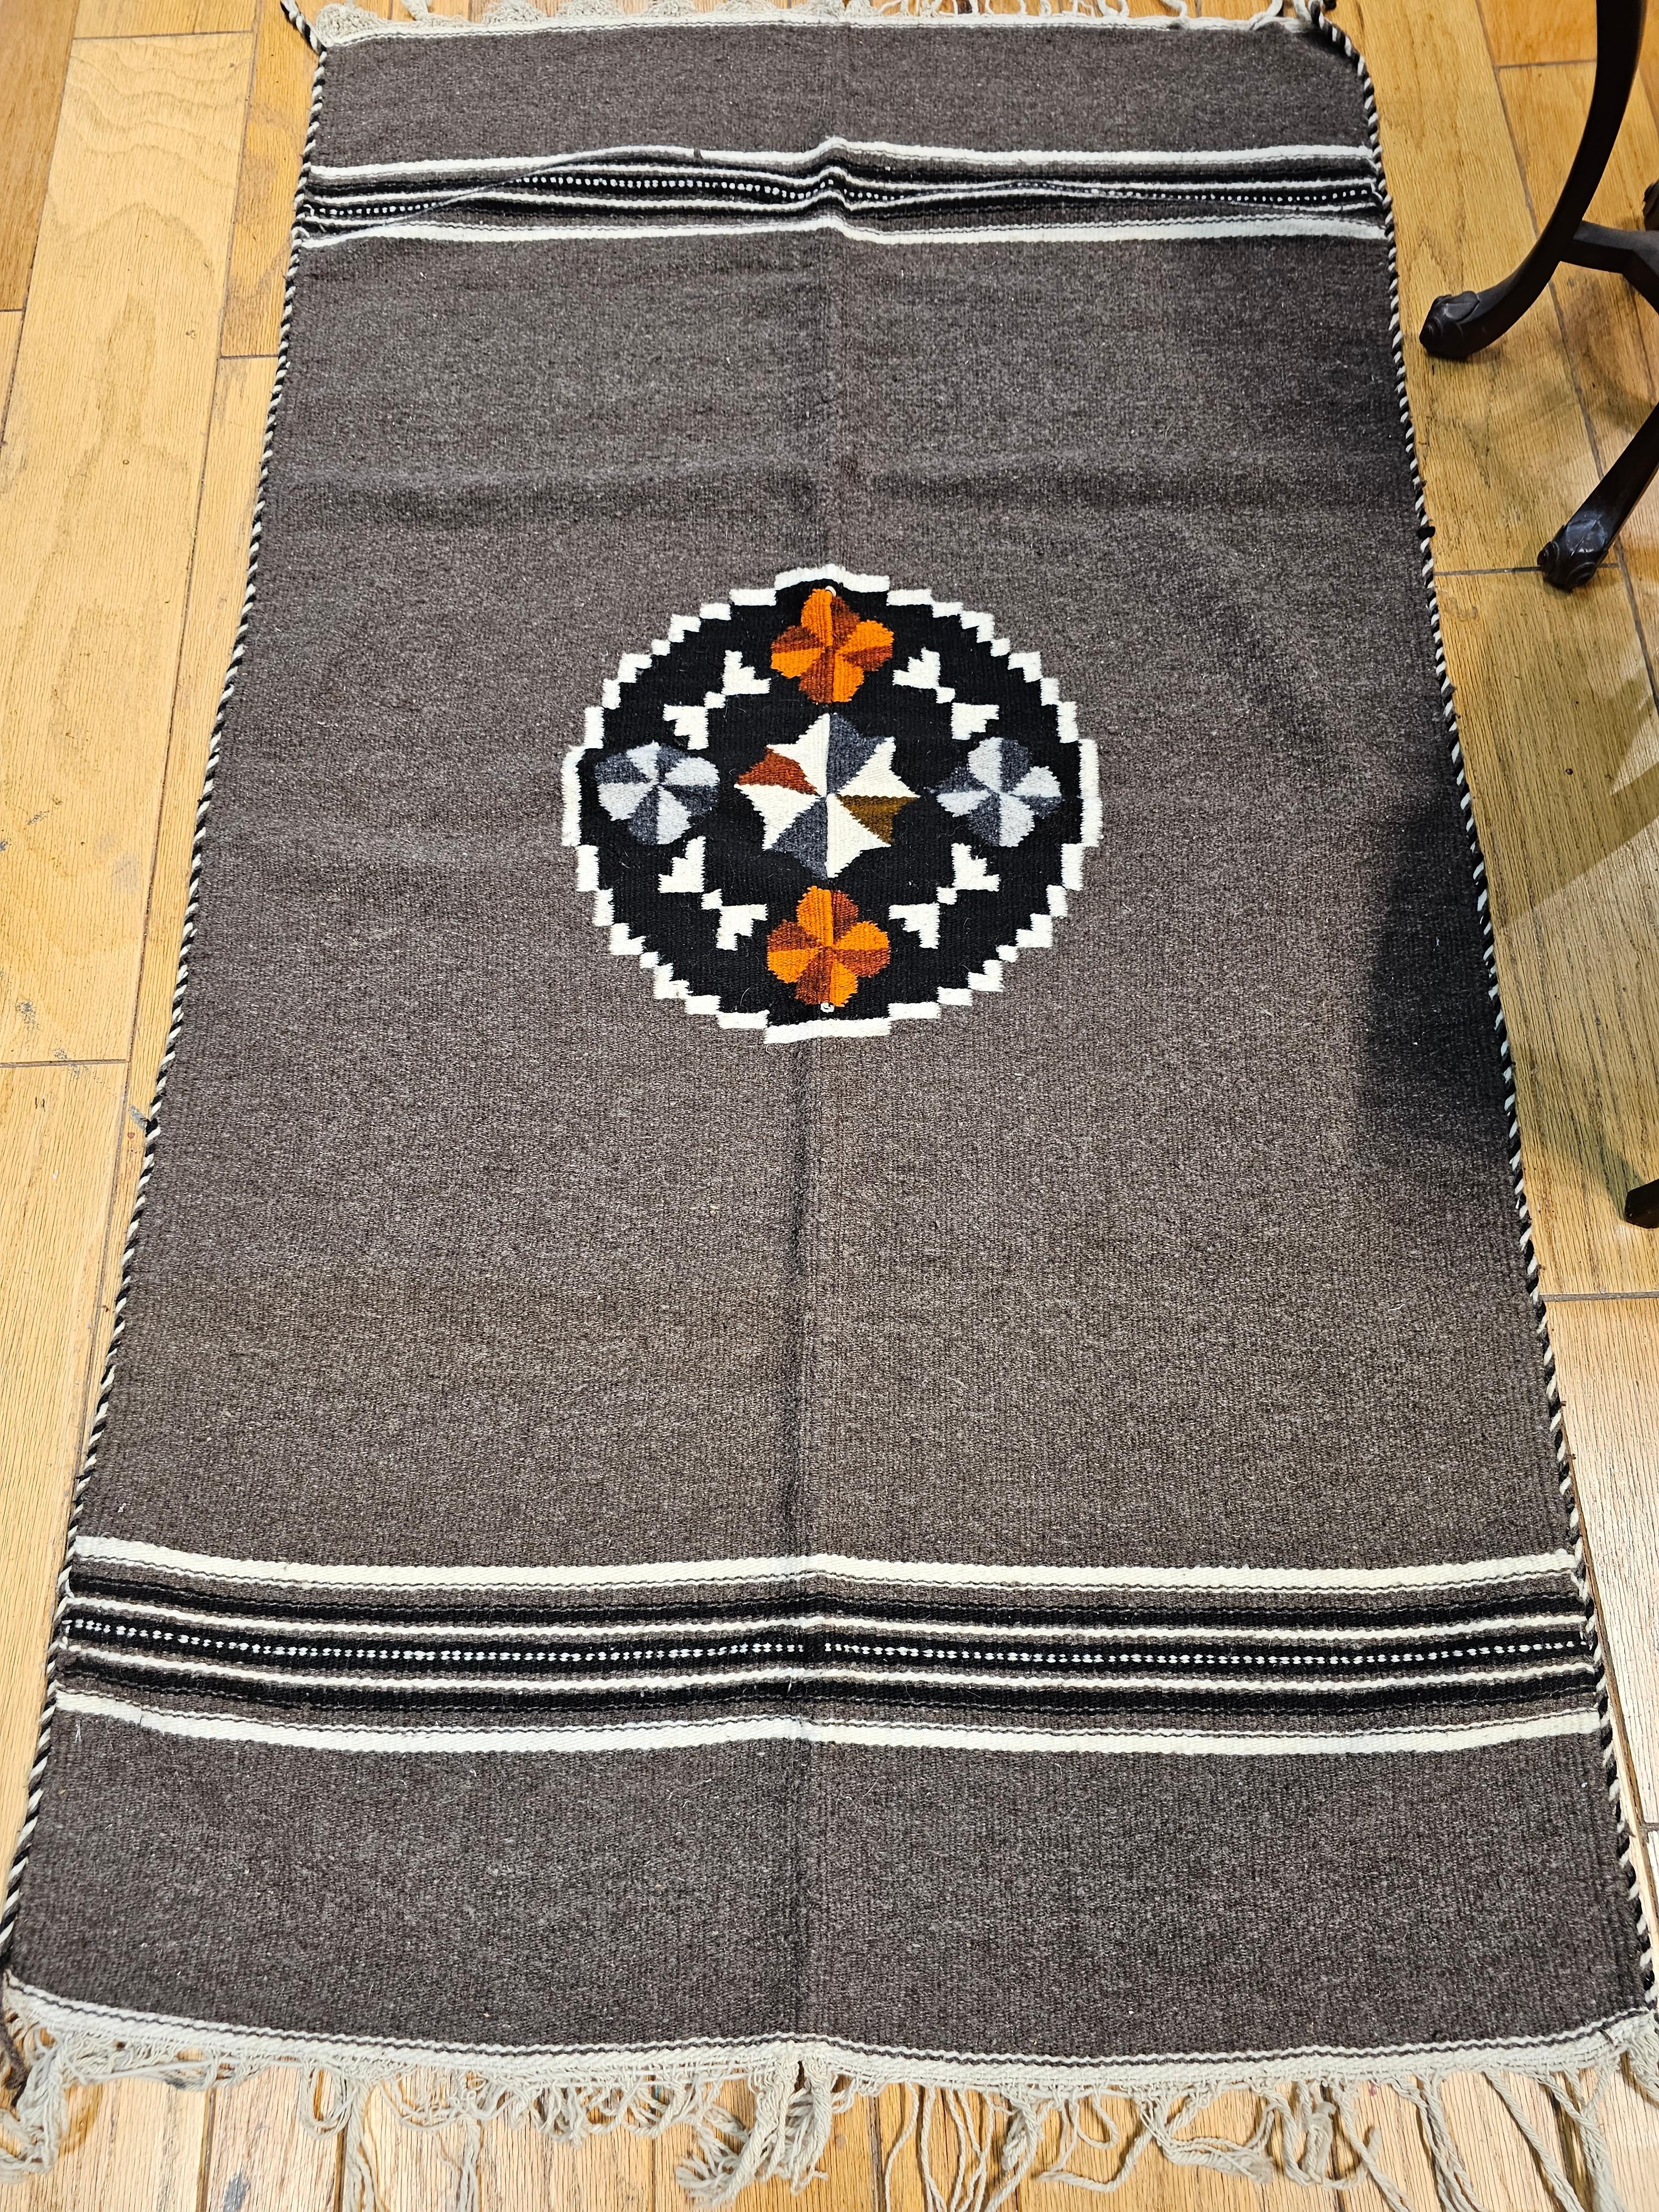 Vintage Mexican Serape Kilim Rug in Dark Gray/Chocolate Color. A beautiful Serape kilim rug was woven in Mexico in the 3rd quarter of the 1900s. The rug has a beautiful dark gray/chocolate color with stripes in the top and bottom of the kilim in